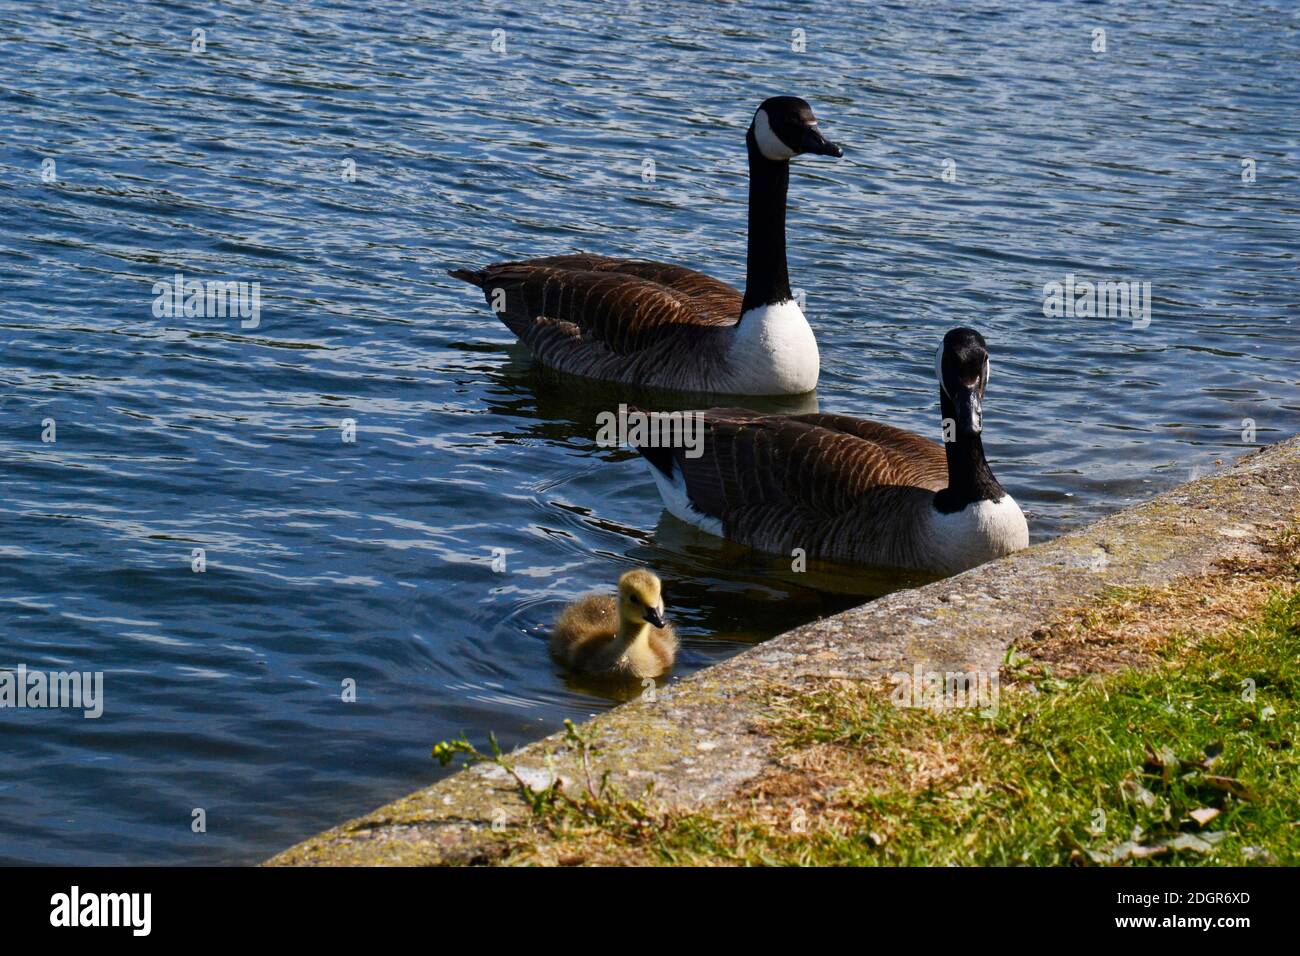 Spring at Tring Reservoirs. The birds have babies. Canada geese with chick in the reservoir. Stock Photo